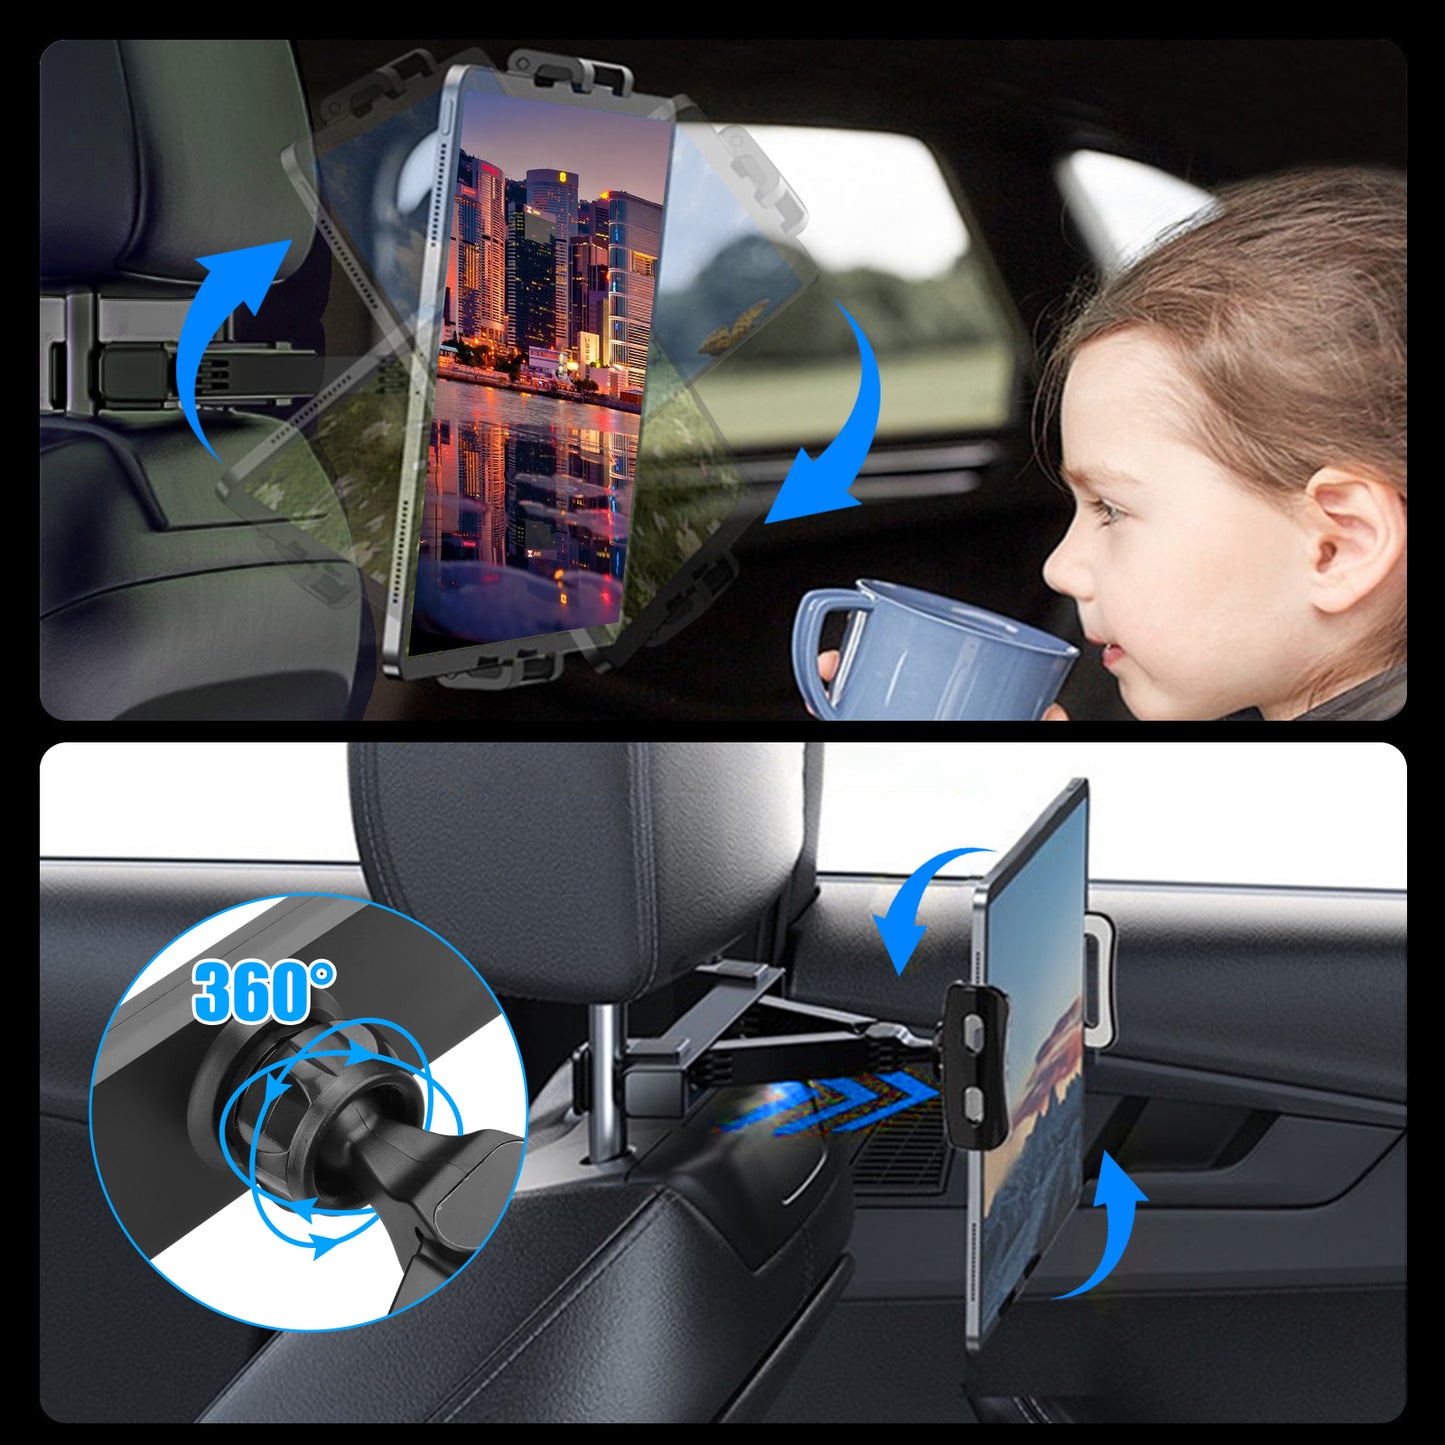 360° Universal Tablet Holder - Car Back Seat Tablet Mount Stand for Kids, Compatible with iPad Pro/Air/Mini, Nintendo Switch, iPhone Samsung, 4.7 to 12.9" Devices